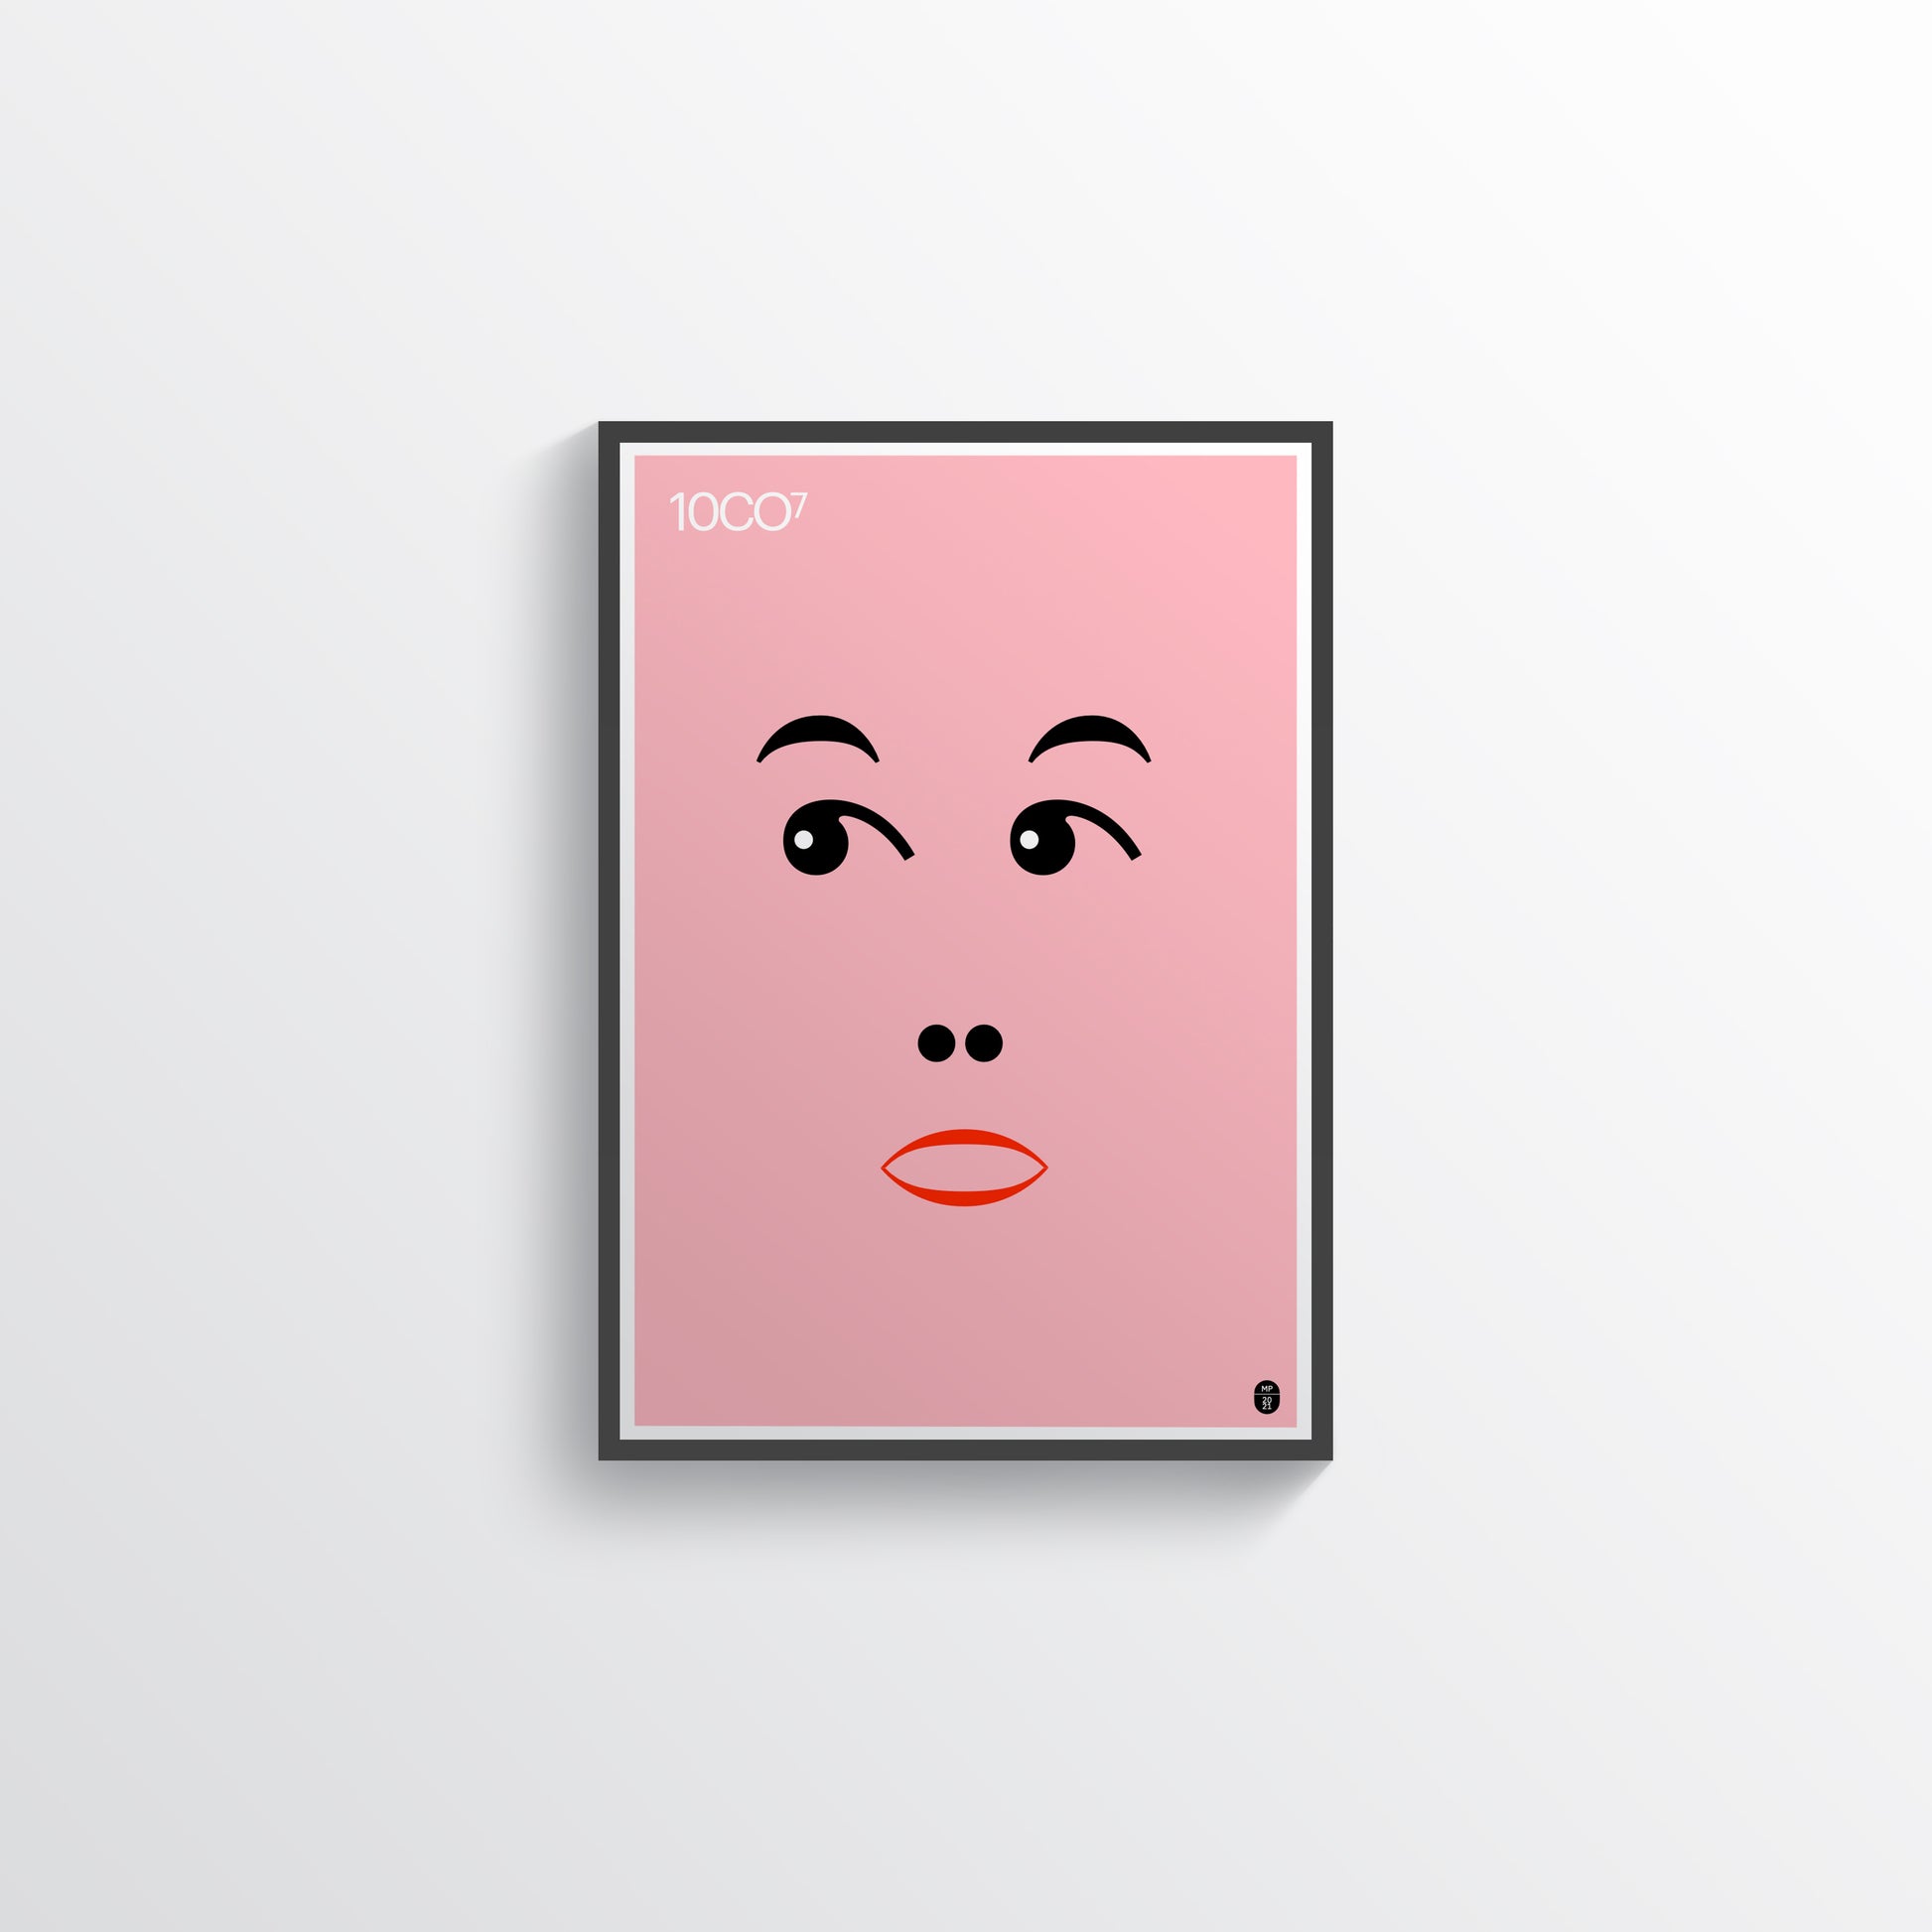 Human face made with fonts on a pink background, available in C-Type print on Fuji Matt Crystal archive paper with a semi-matt finish. - Starting from 19 € / Shipped Worldwide